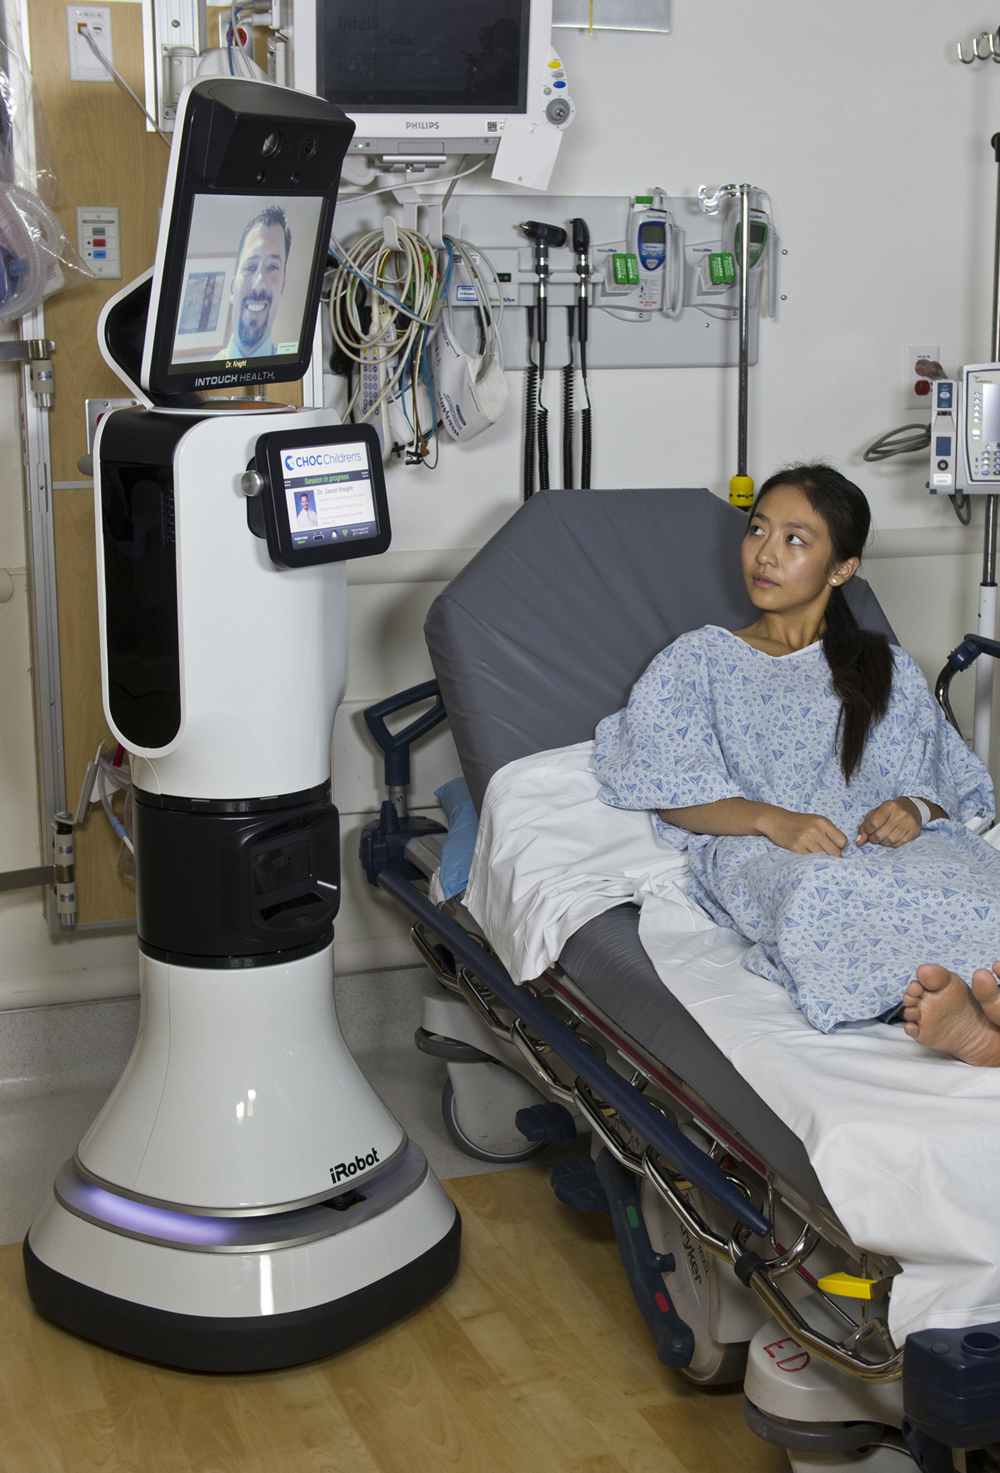 Physician Robot to Begin Making Rounds